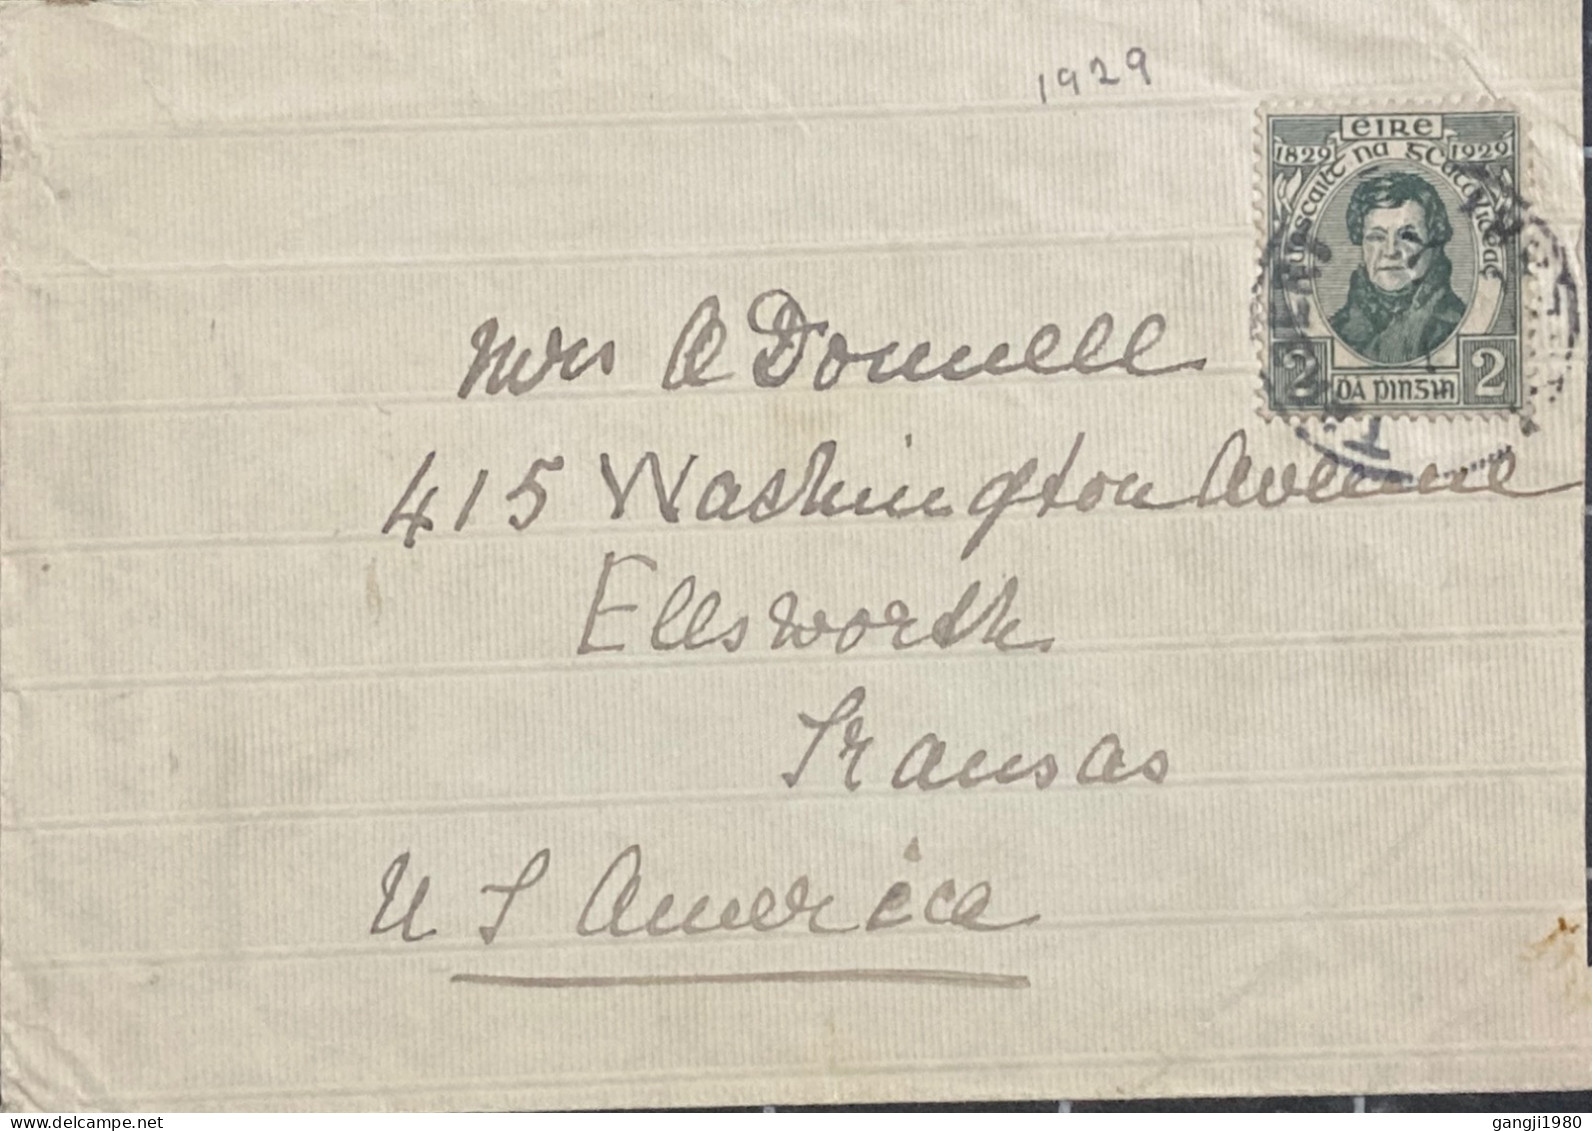 IRELAND 1929, COVER USED TO USA,  DANIEL O CONNELL STAMP, TARBERT TOWN CANCEL. - Briefe U. Dokumente